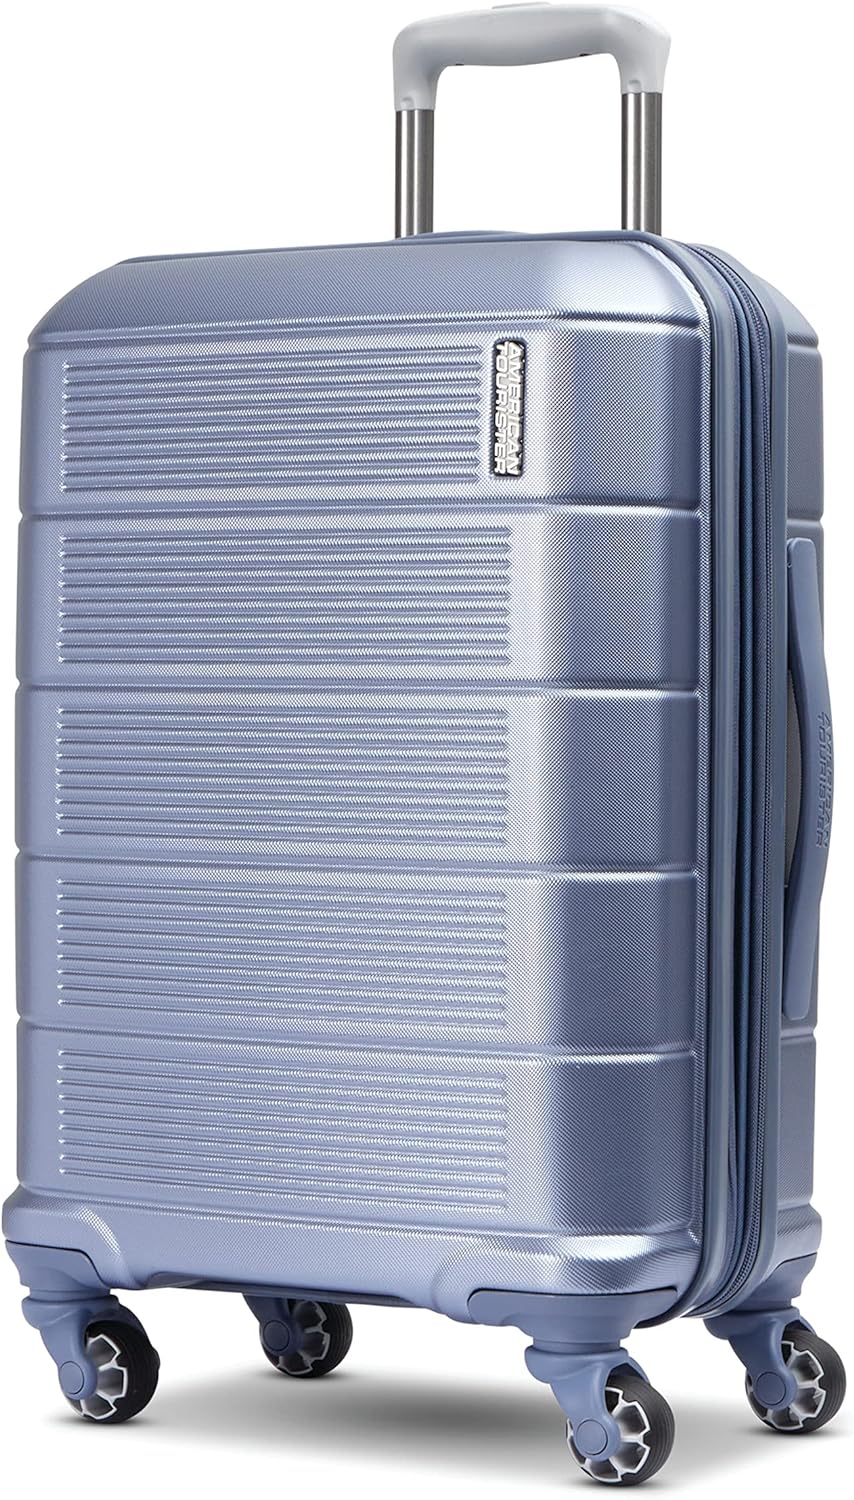 American Tourister Stratum 2.0 Expandable Hardside Luggage with Spinner Wheels, Slate Blue, Carry-on 